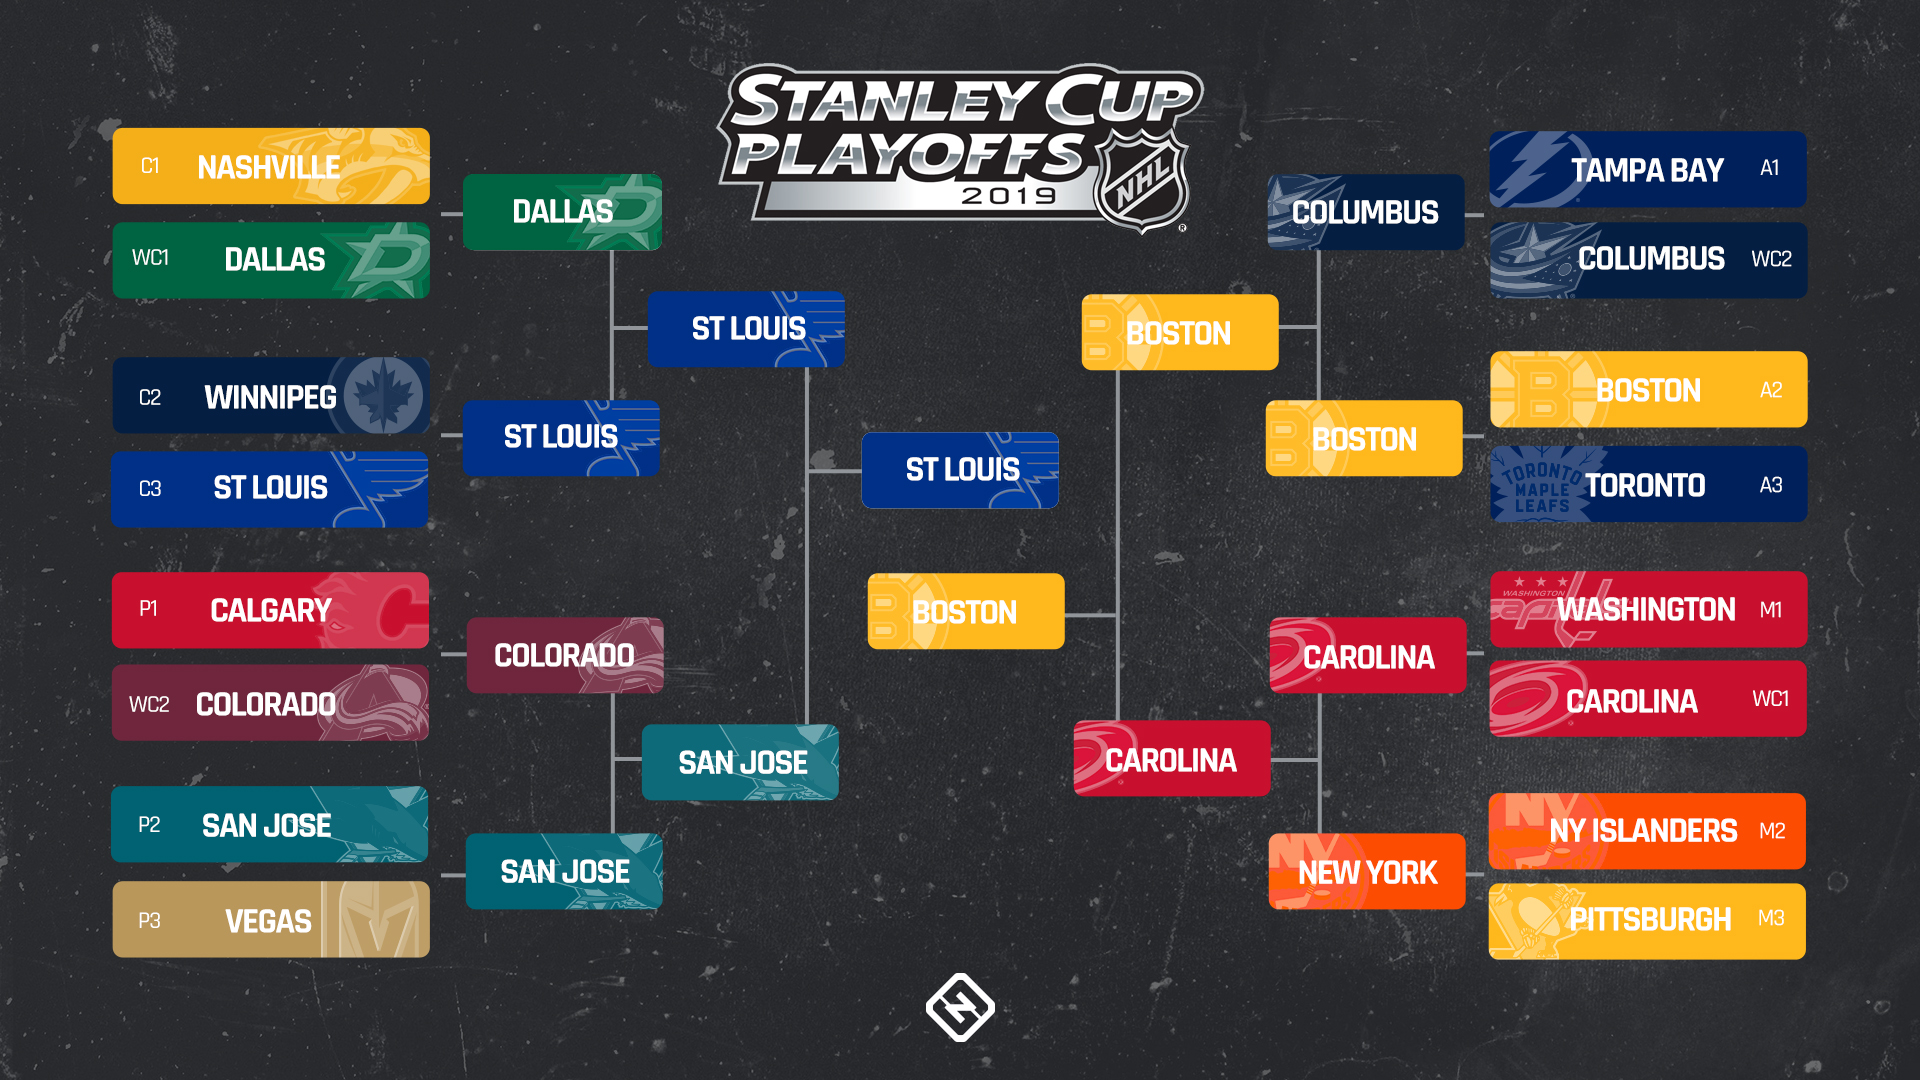 NHL playoffs schedule 2019: Full bracket, dates, times, TV channels for